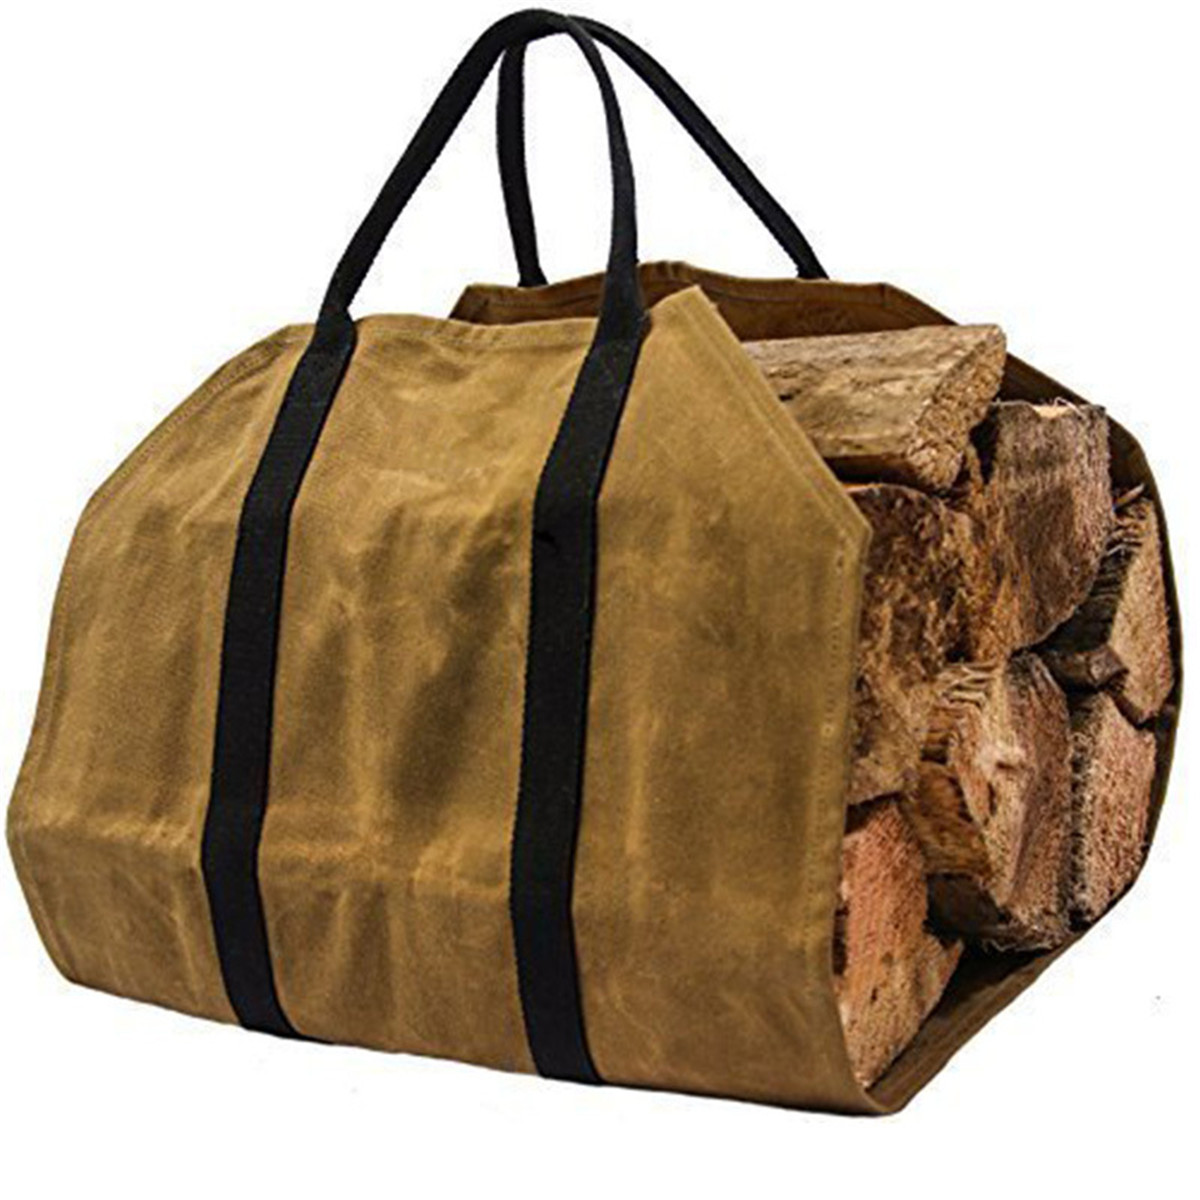 khaki-Firewood-Carrier-Log-Carrier-Wood-Carrying-Bag-for-Fireplace-16oz-Waxed-Canvas-1388831-5